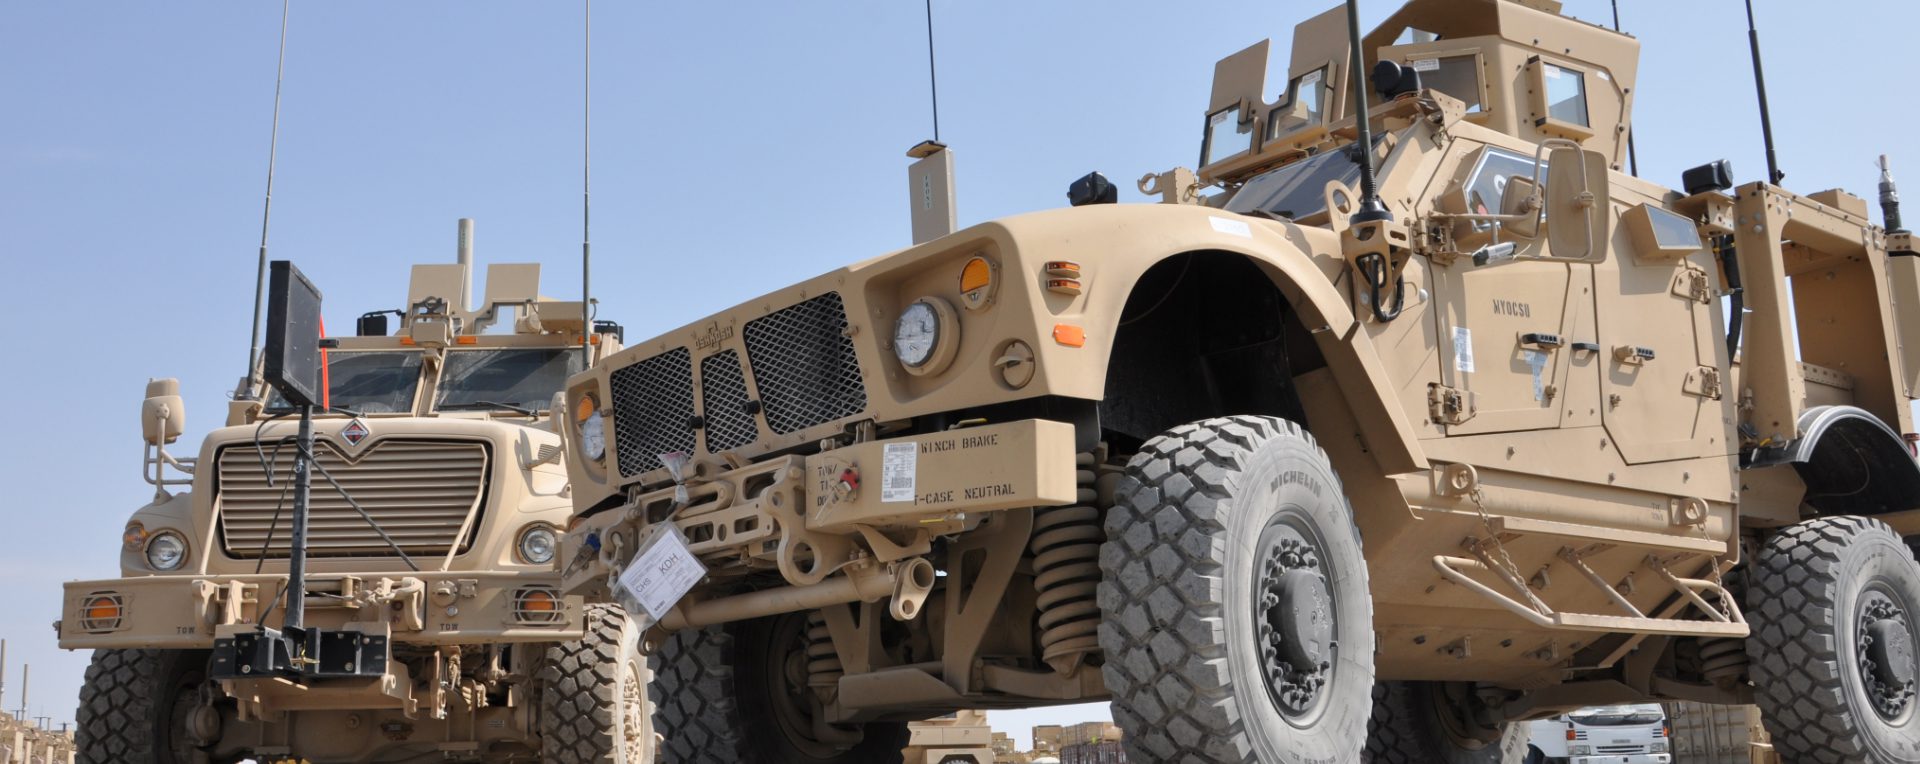 Aurora Defense Group - Lights for Military Vehicles